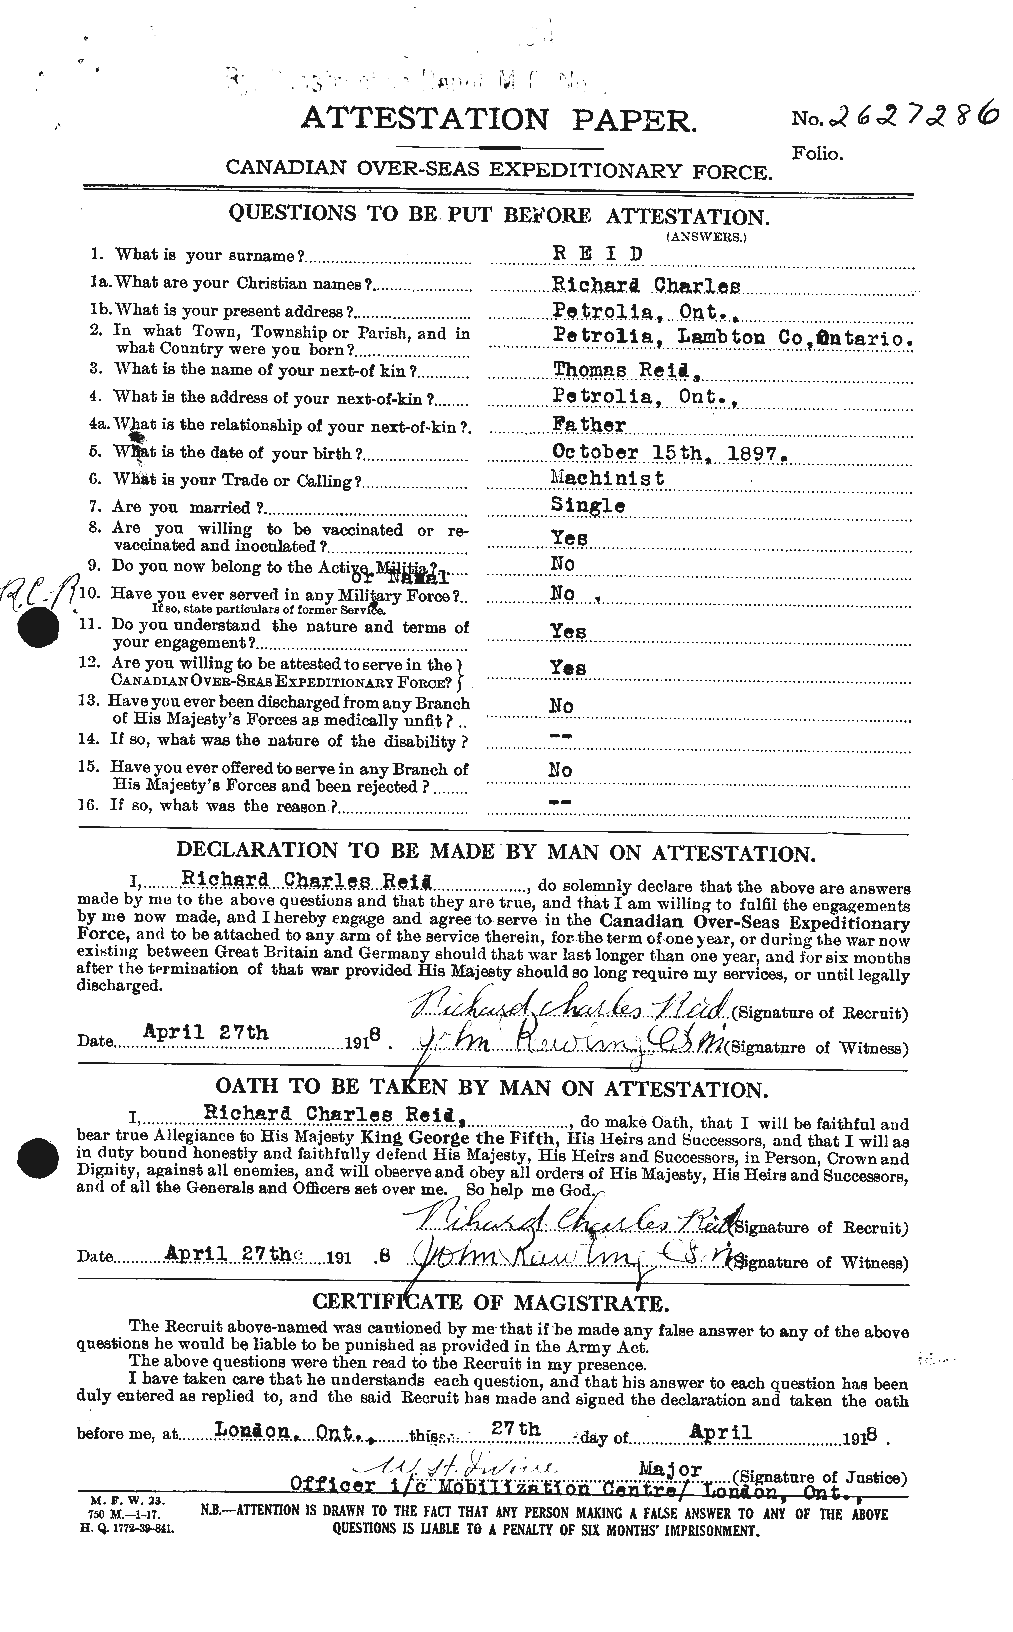 Personnel Records of the First World War - CEF 601860a